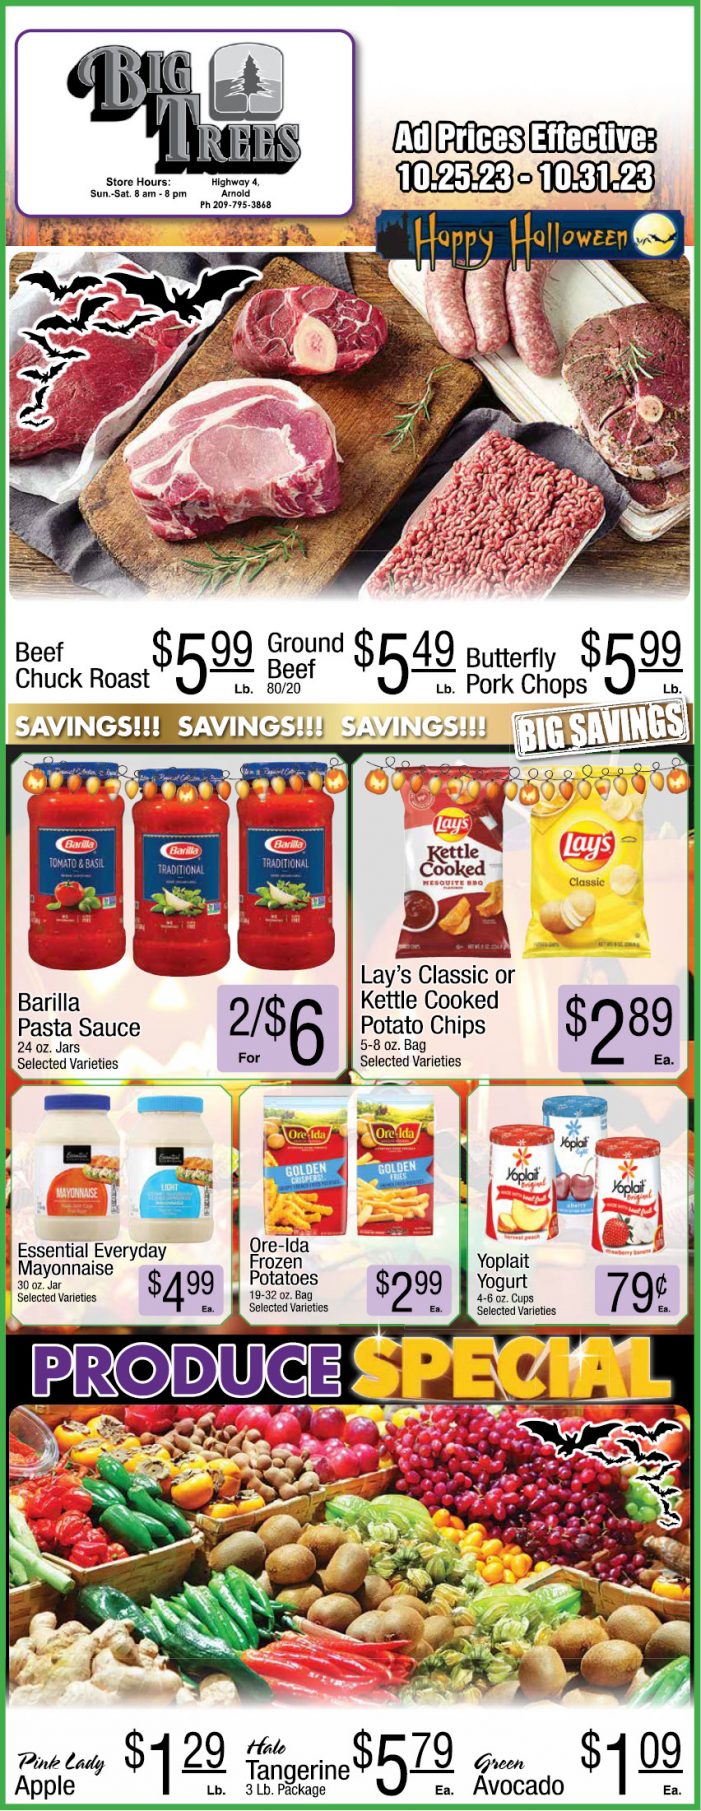 Big Trees Market Weekly Ad, Grocery, Produce, Meat & Deli Specials Through October 31st!  Shop Local & Save!